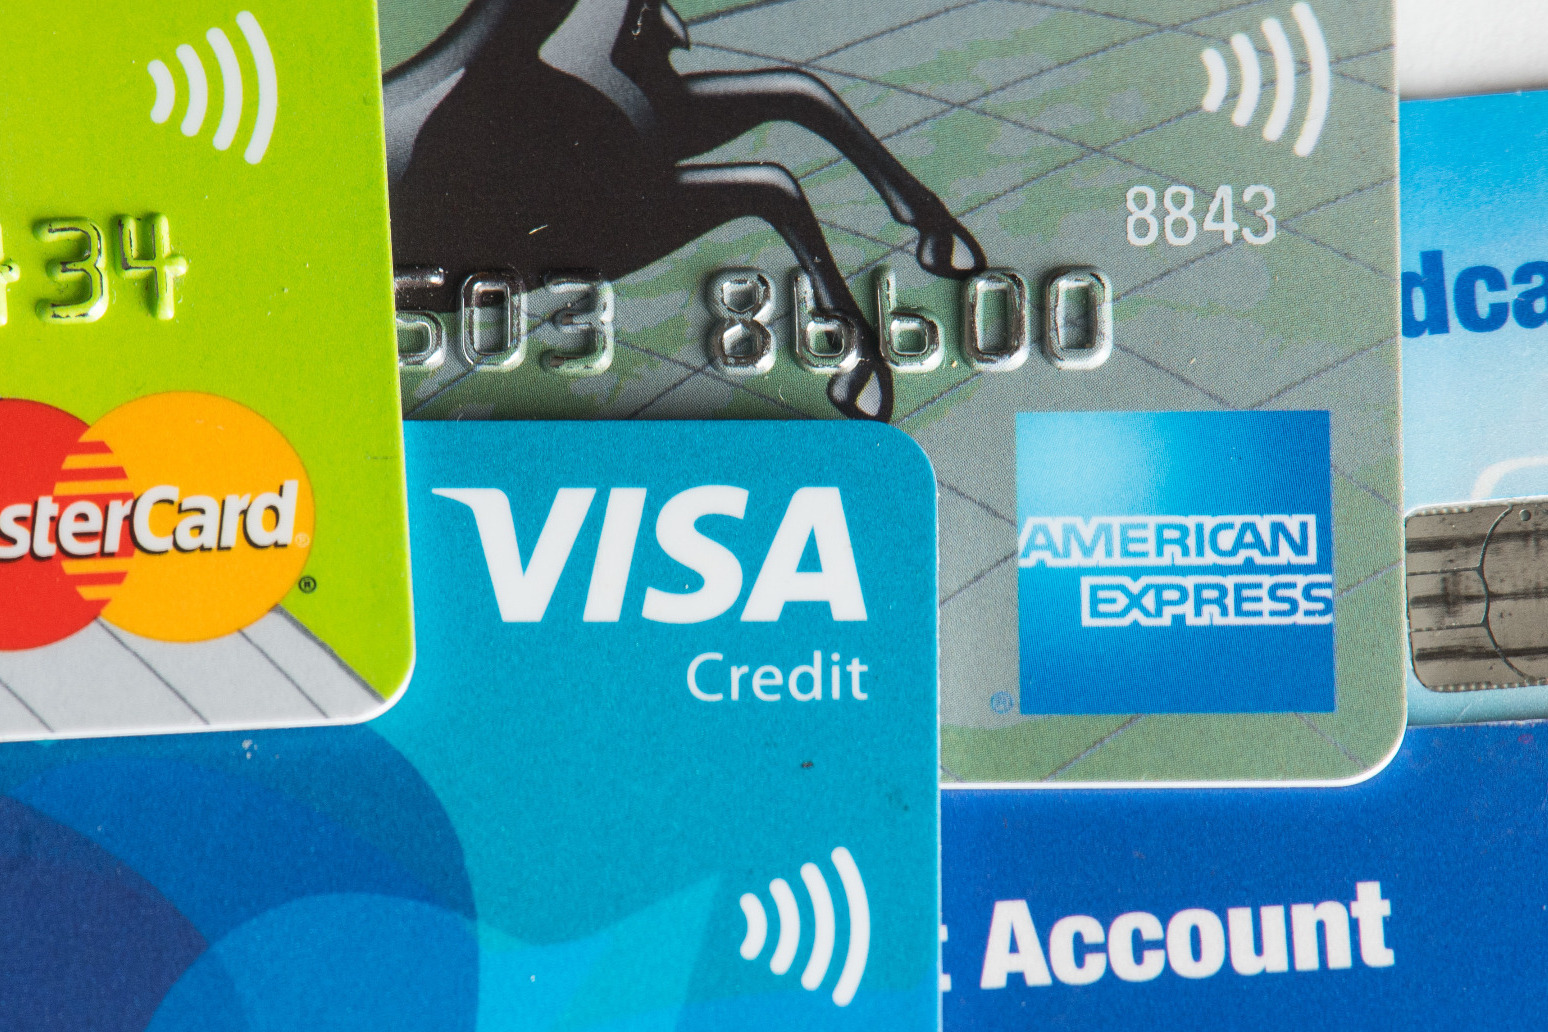 Outstanding credit card balances jumped by 10.1% annually in October 